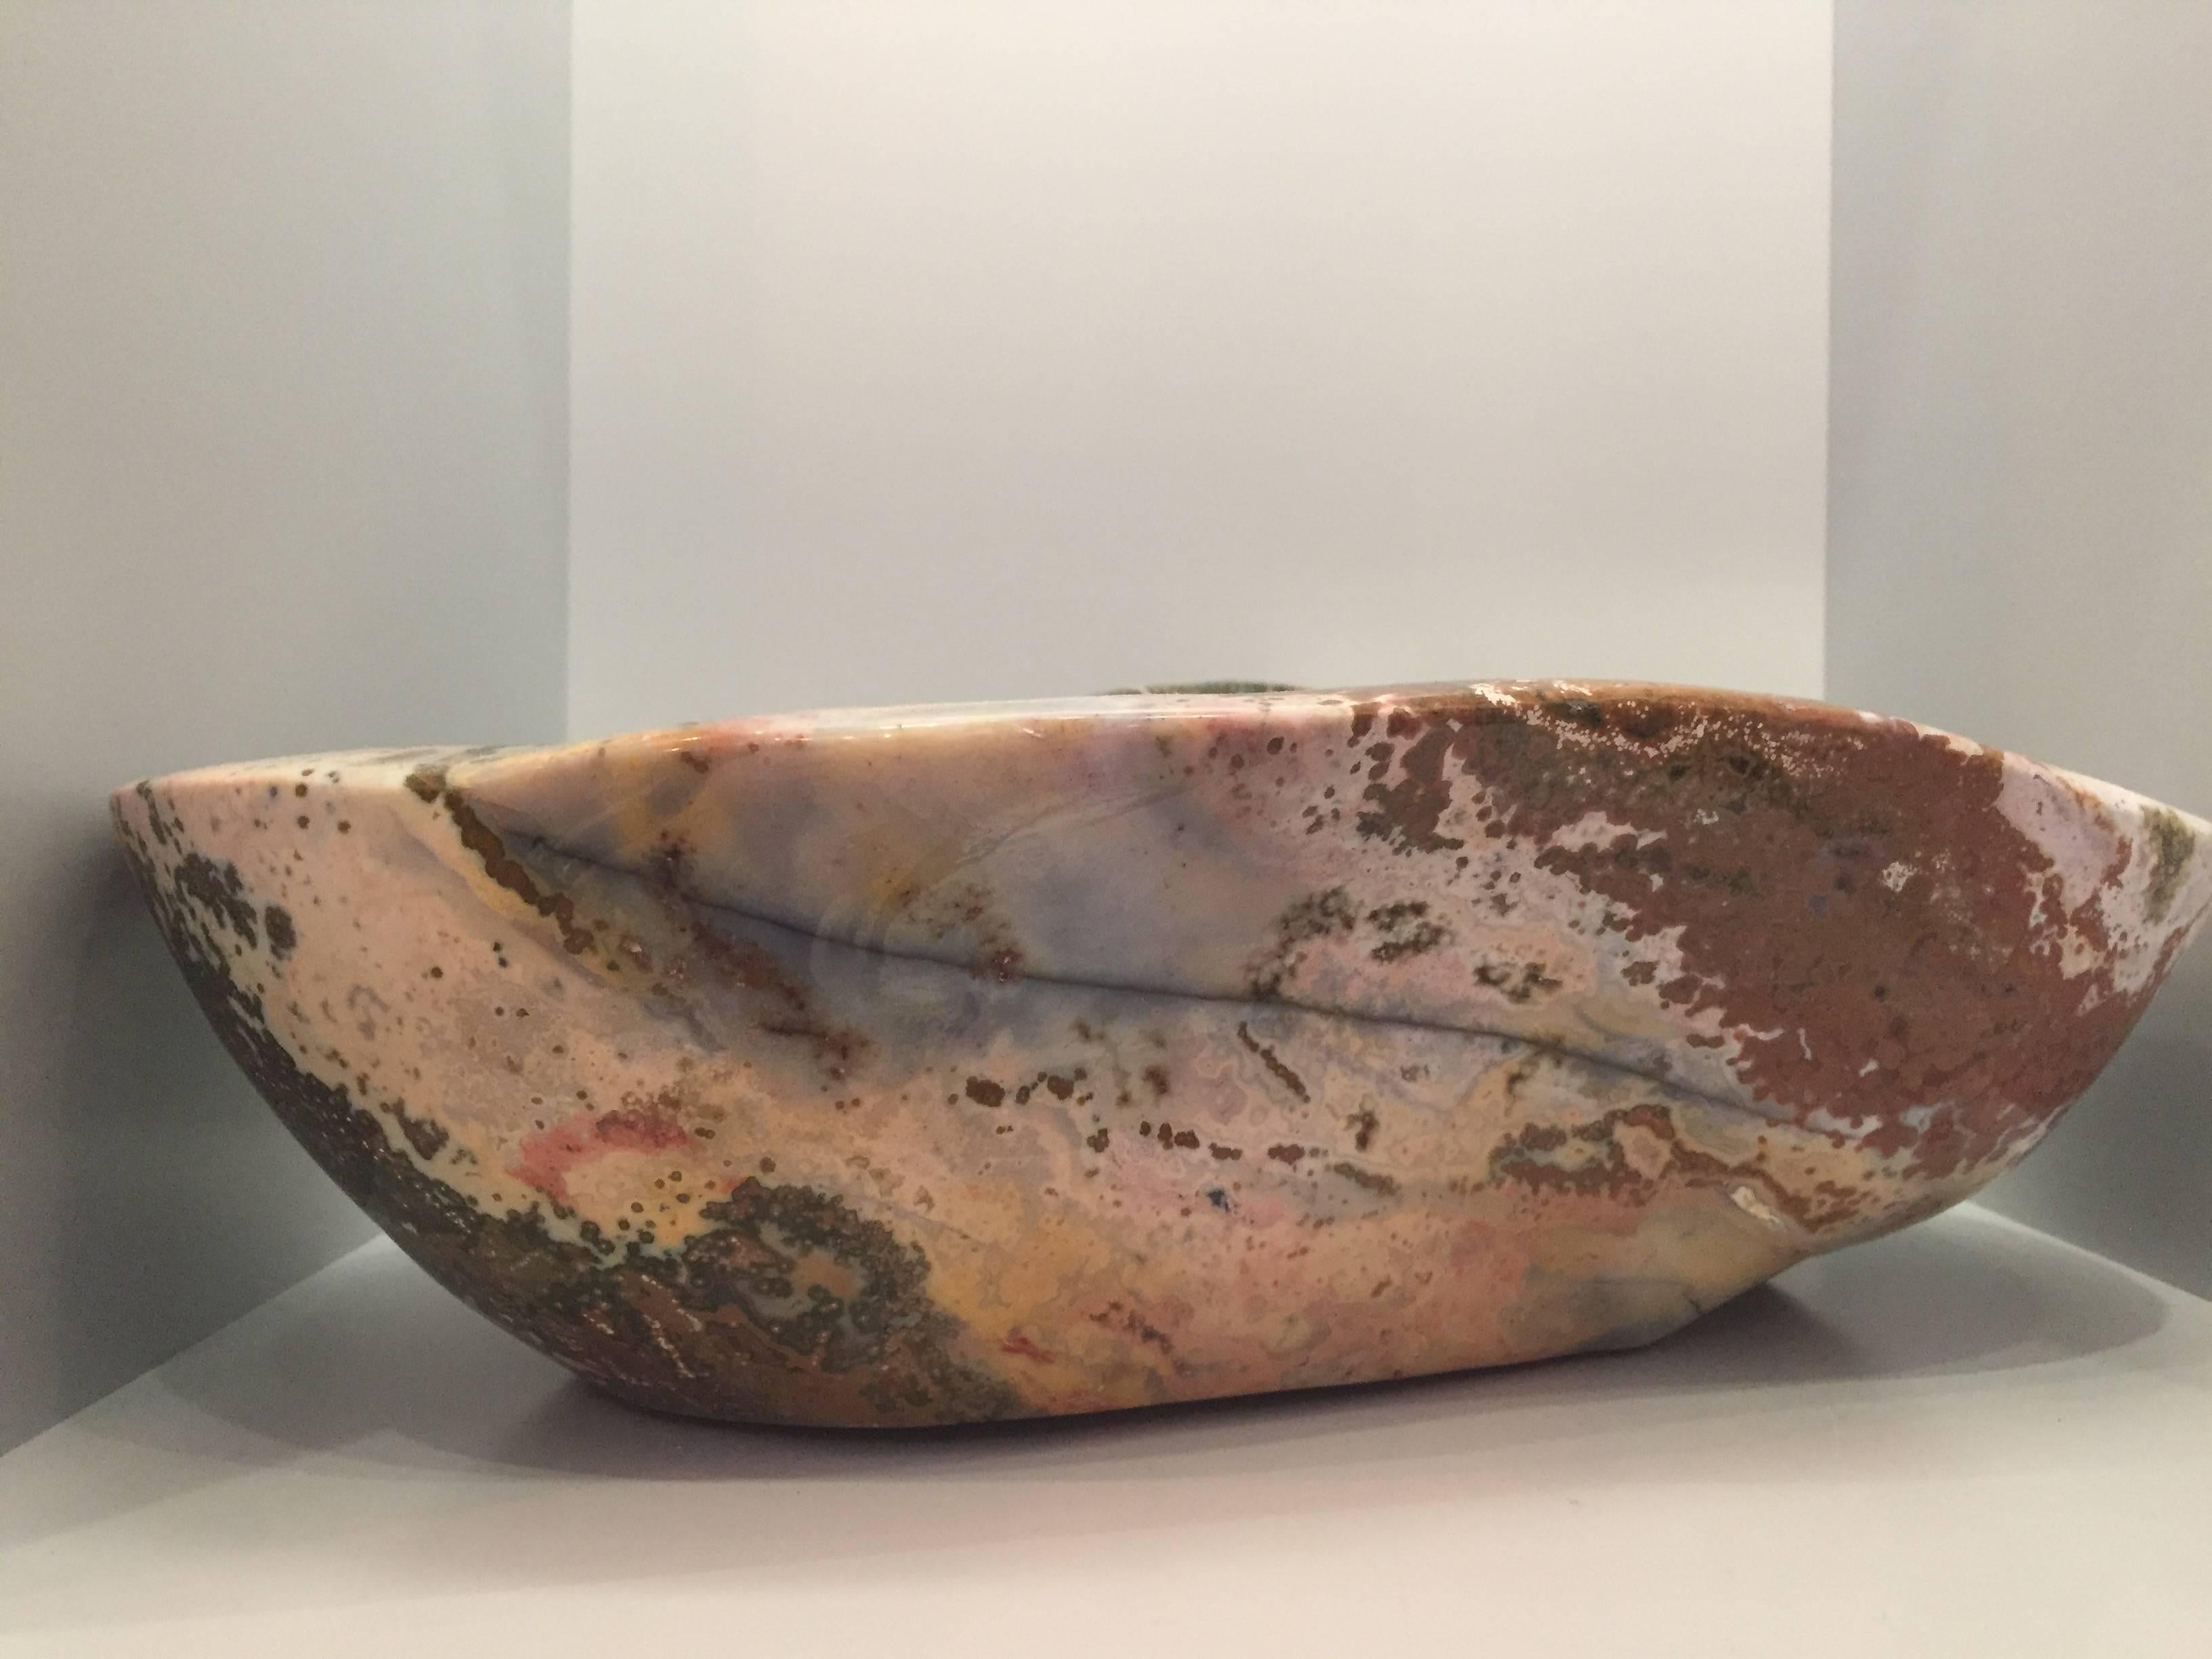 Organic Modern Ocean Jasper Vide-Poche Bowl, Rare and Large in Size, Hand-Carved in Madagascar